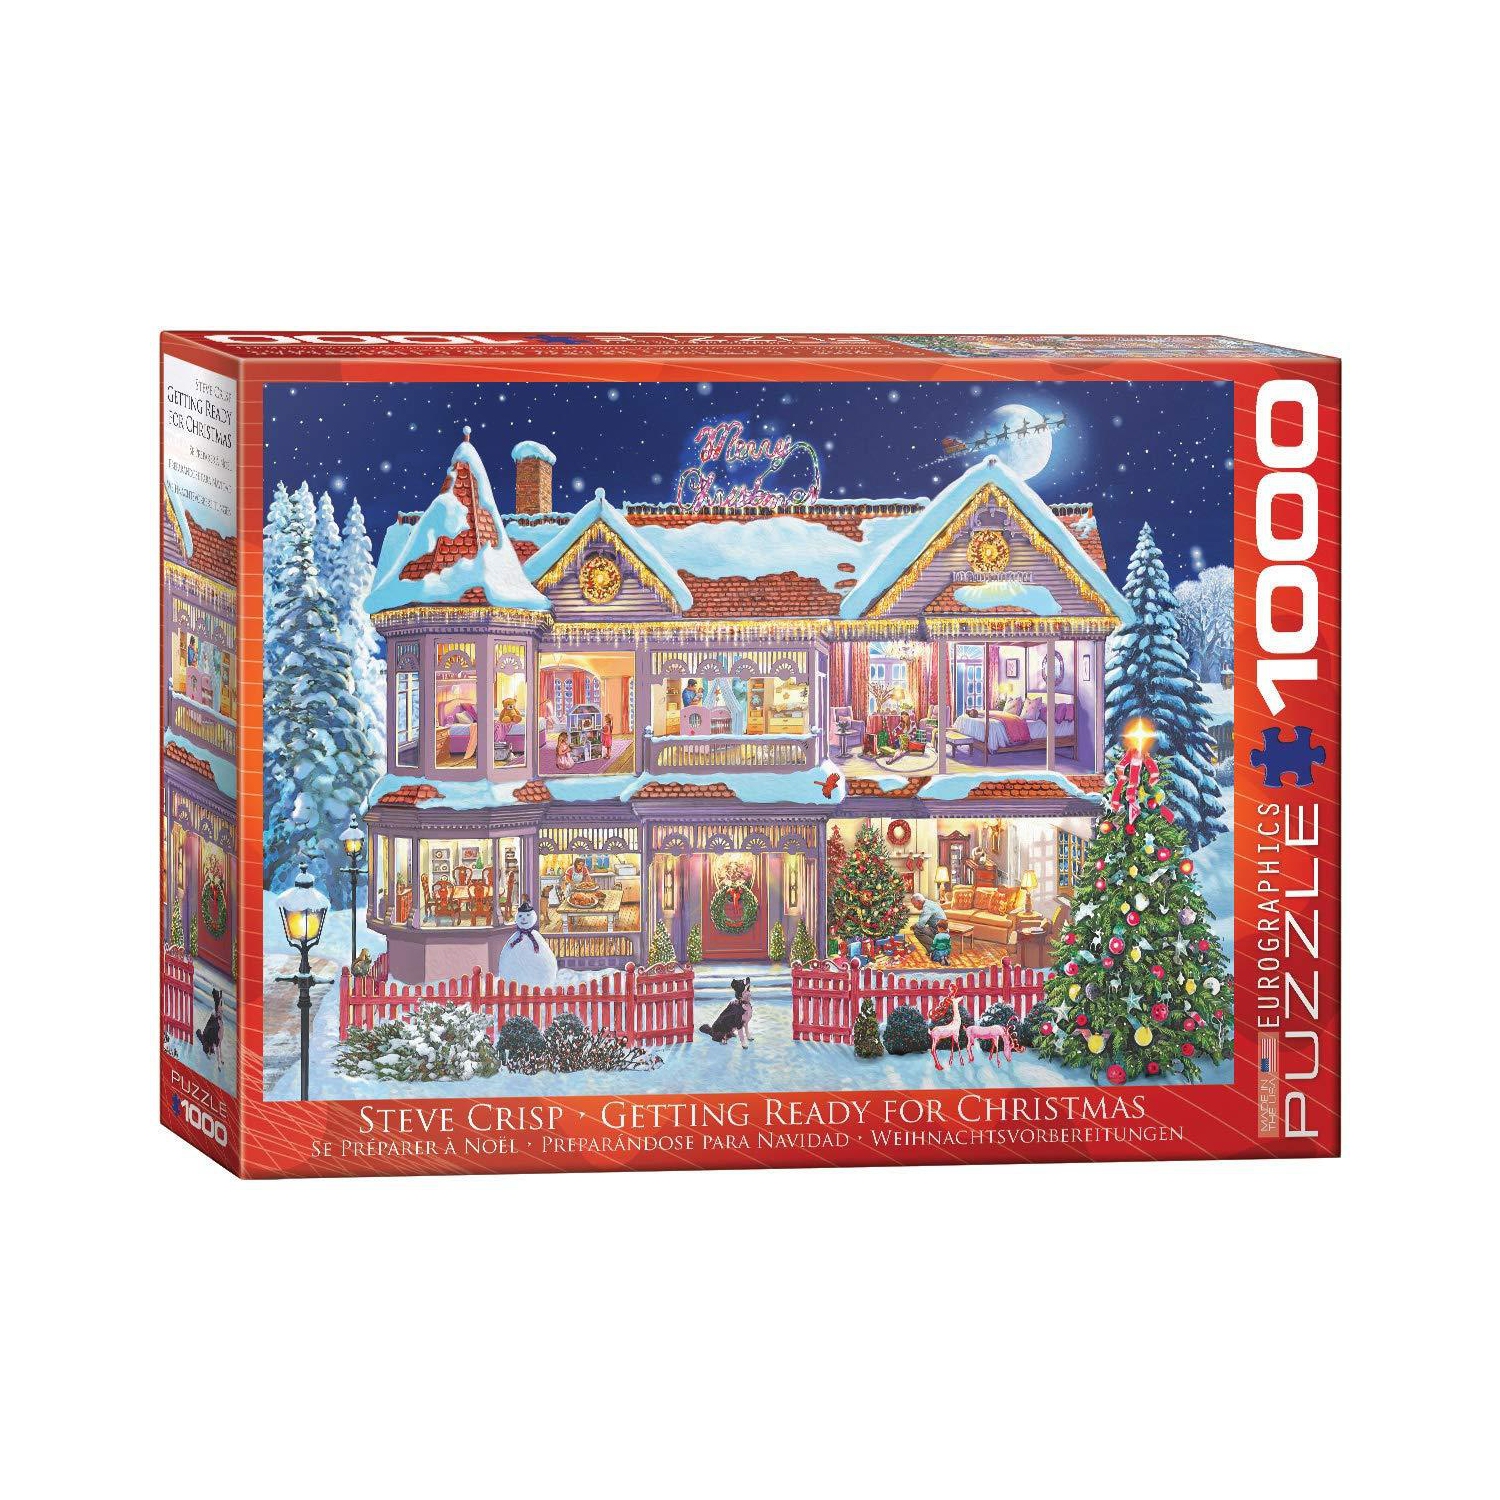 Getting Ready Christmas by Steve Crisp 1000-Piece Puzzle